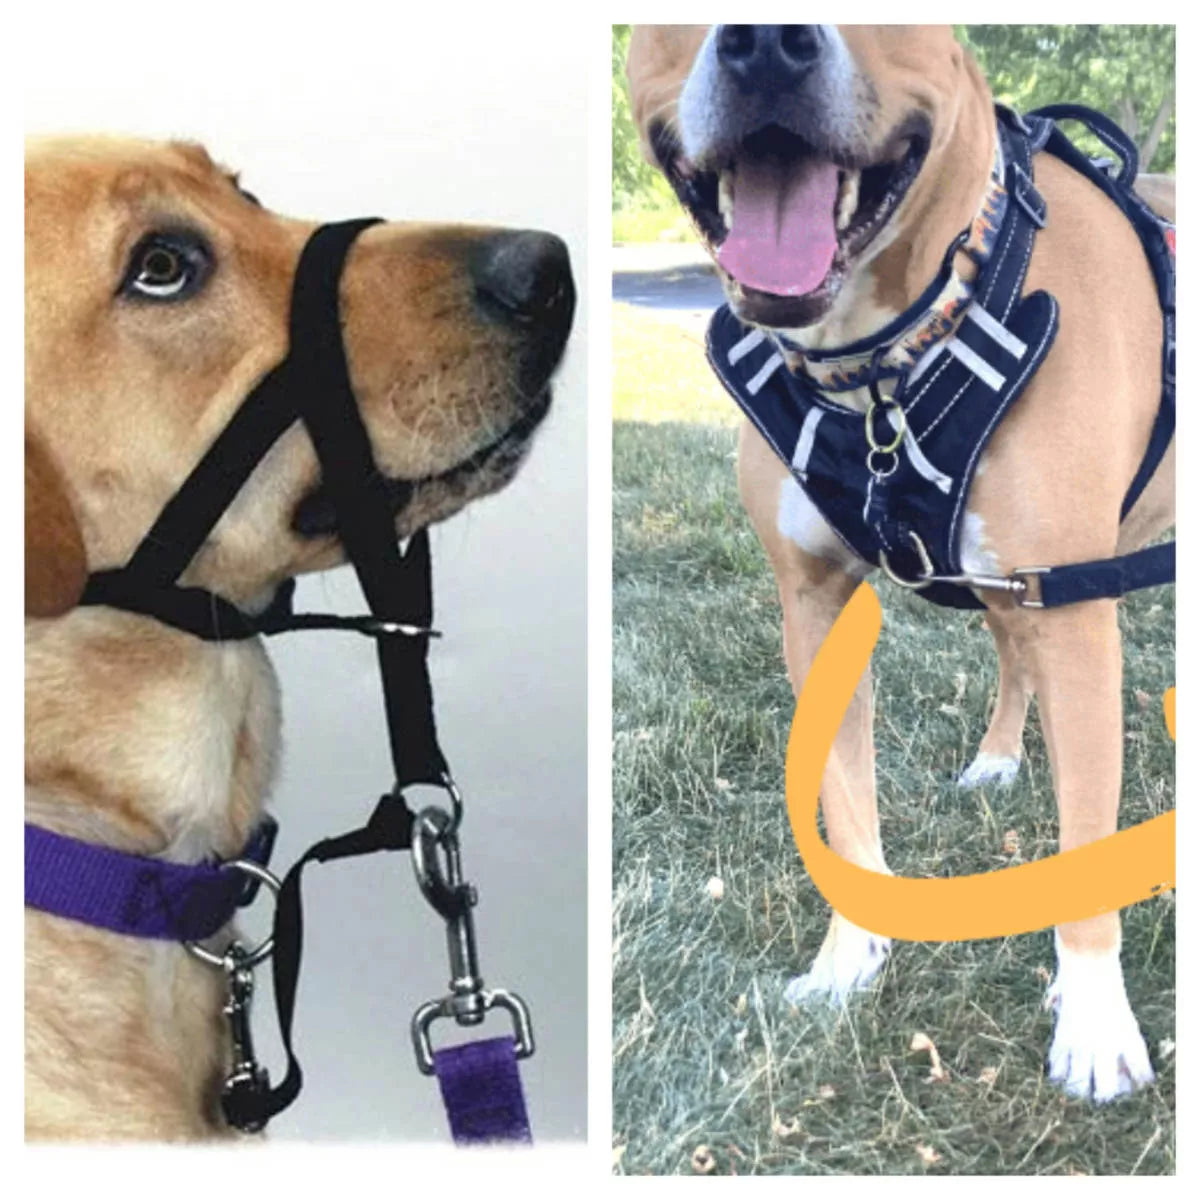 Head Halter or Front Clip Harness - which one is best?